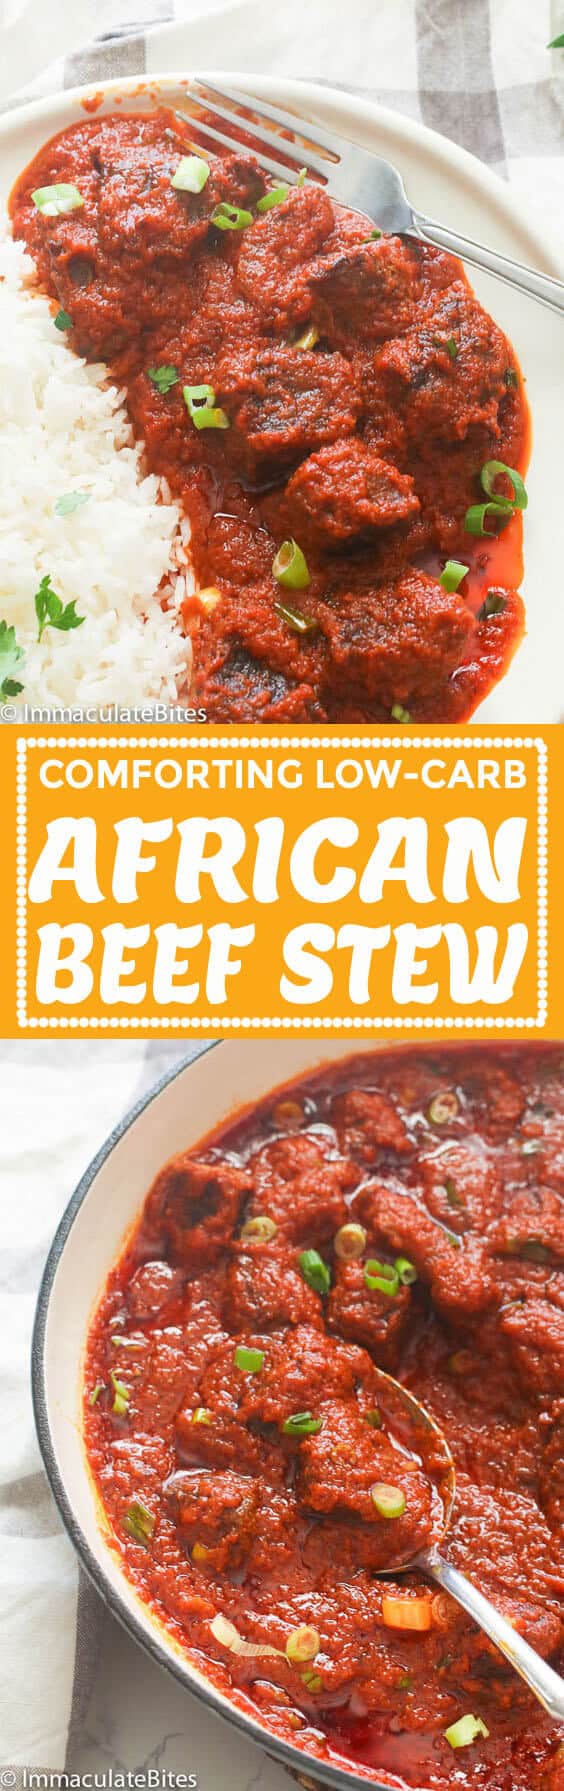 African Beef Stew